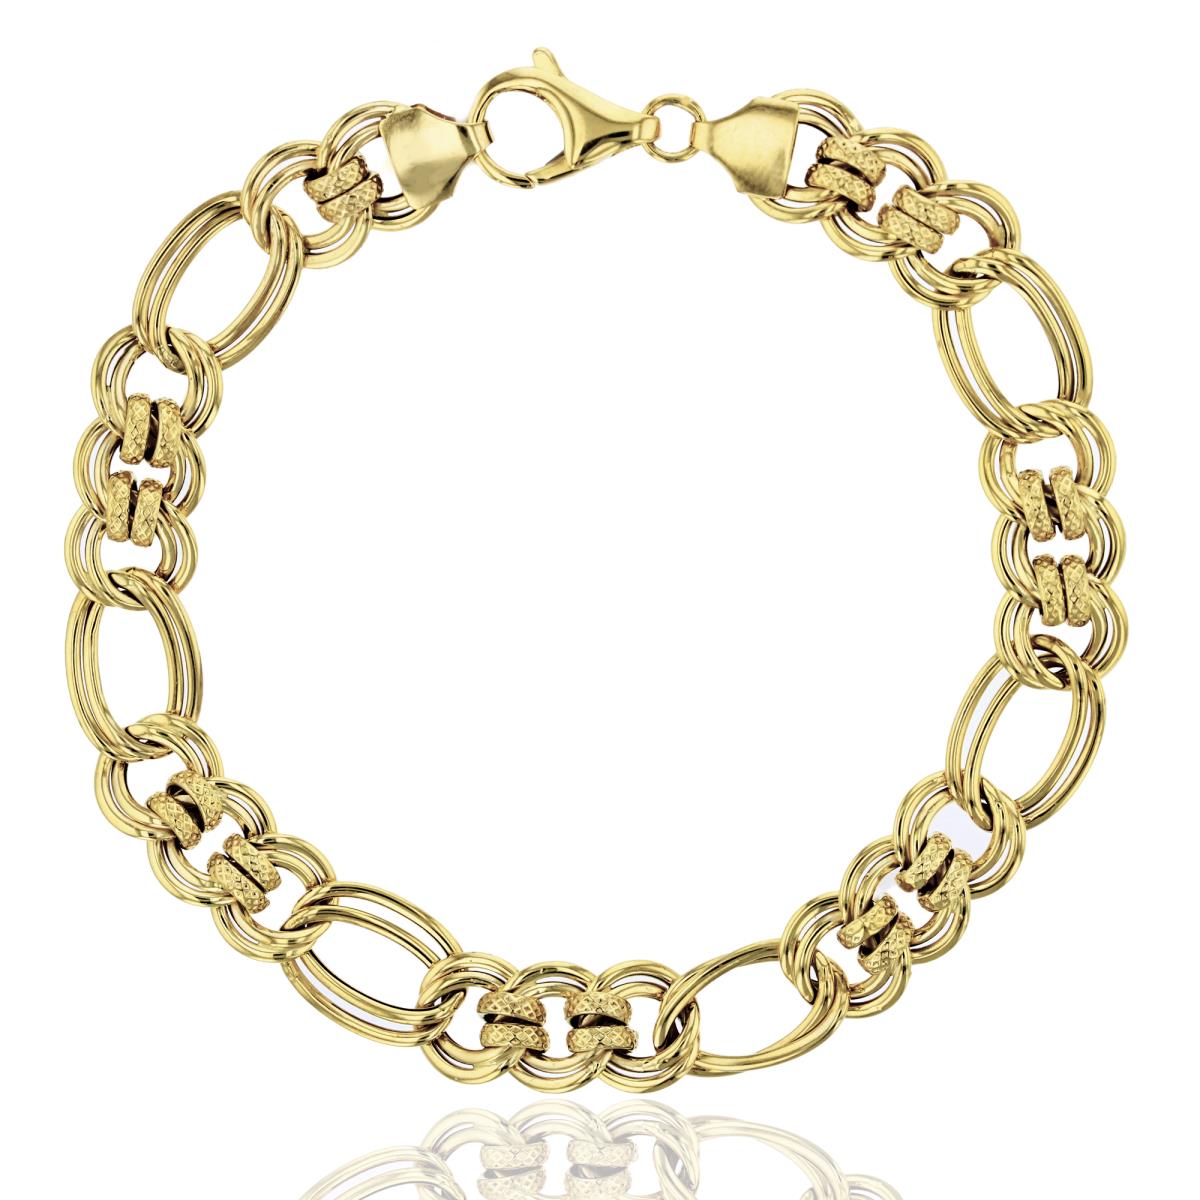 10K Yellow Gold Polished Super Hollow 8.50mm 7.50" Double Figaro with DC Double Ring Bracelet